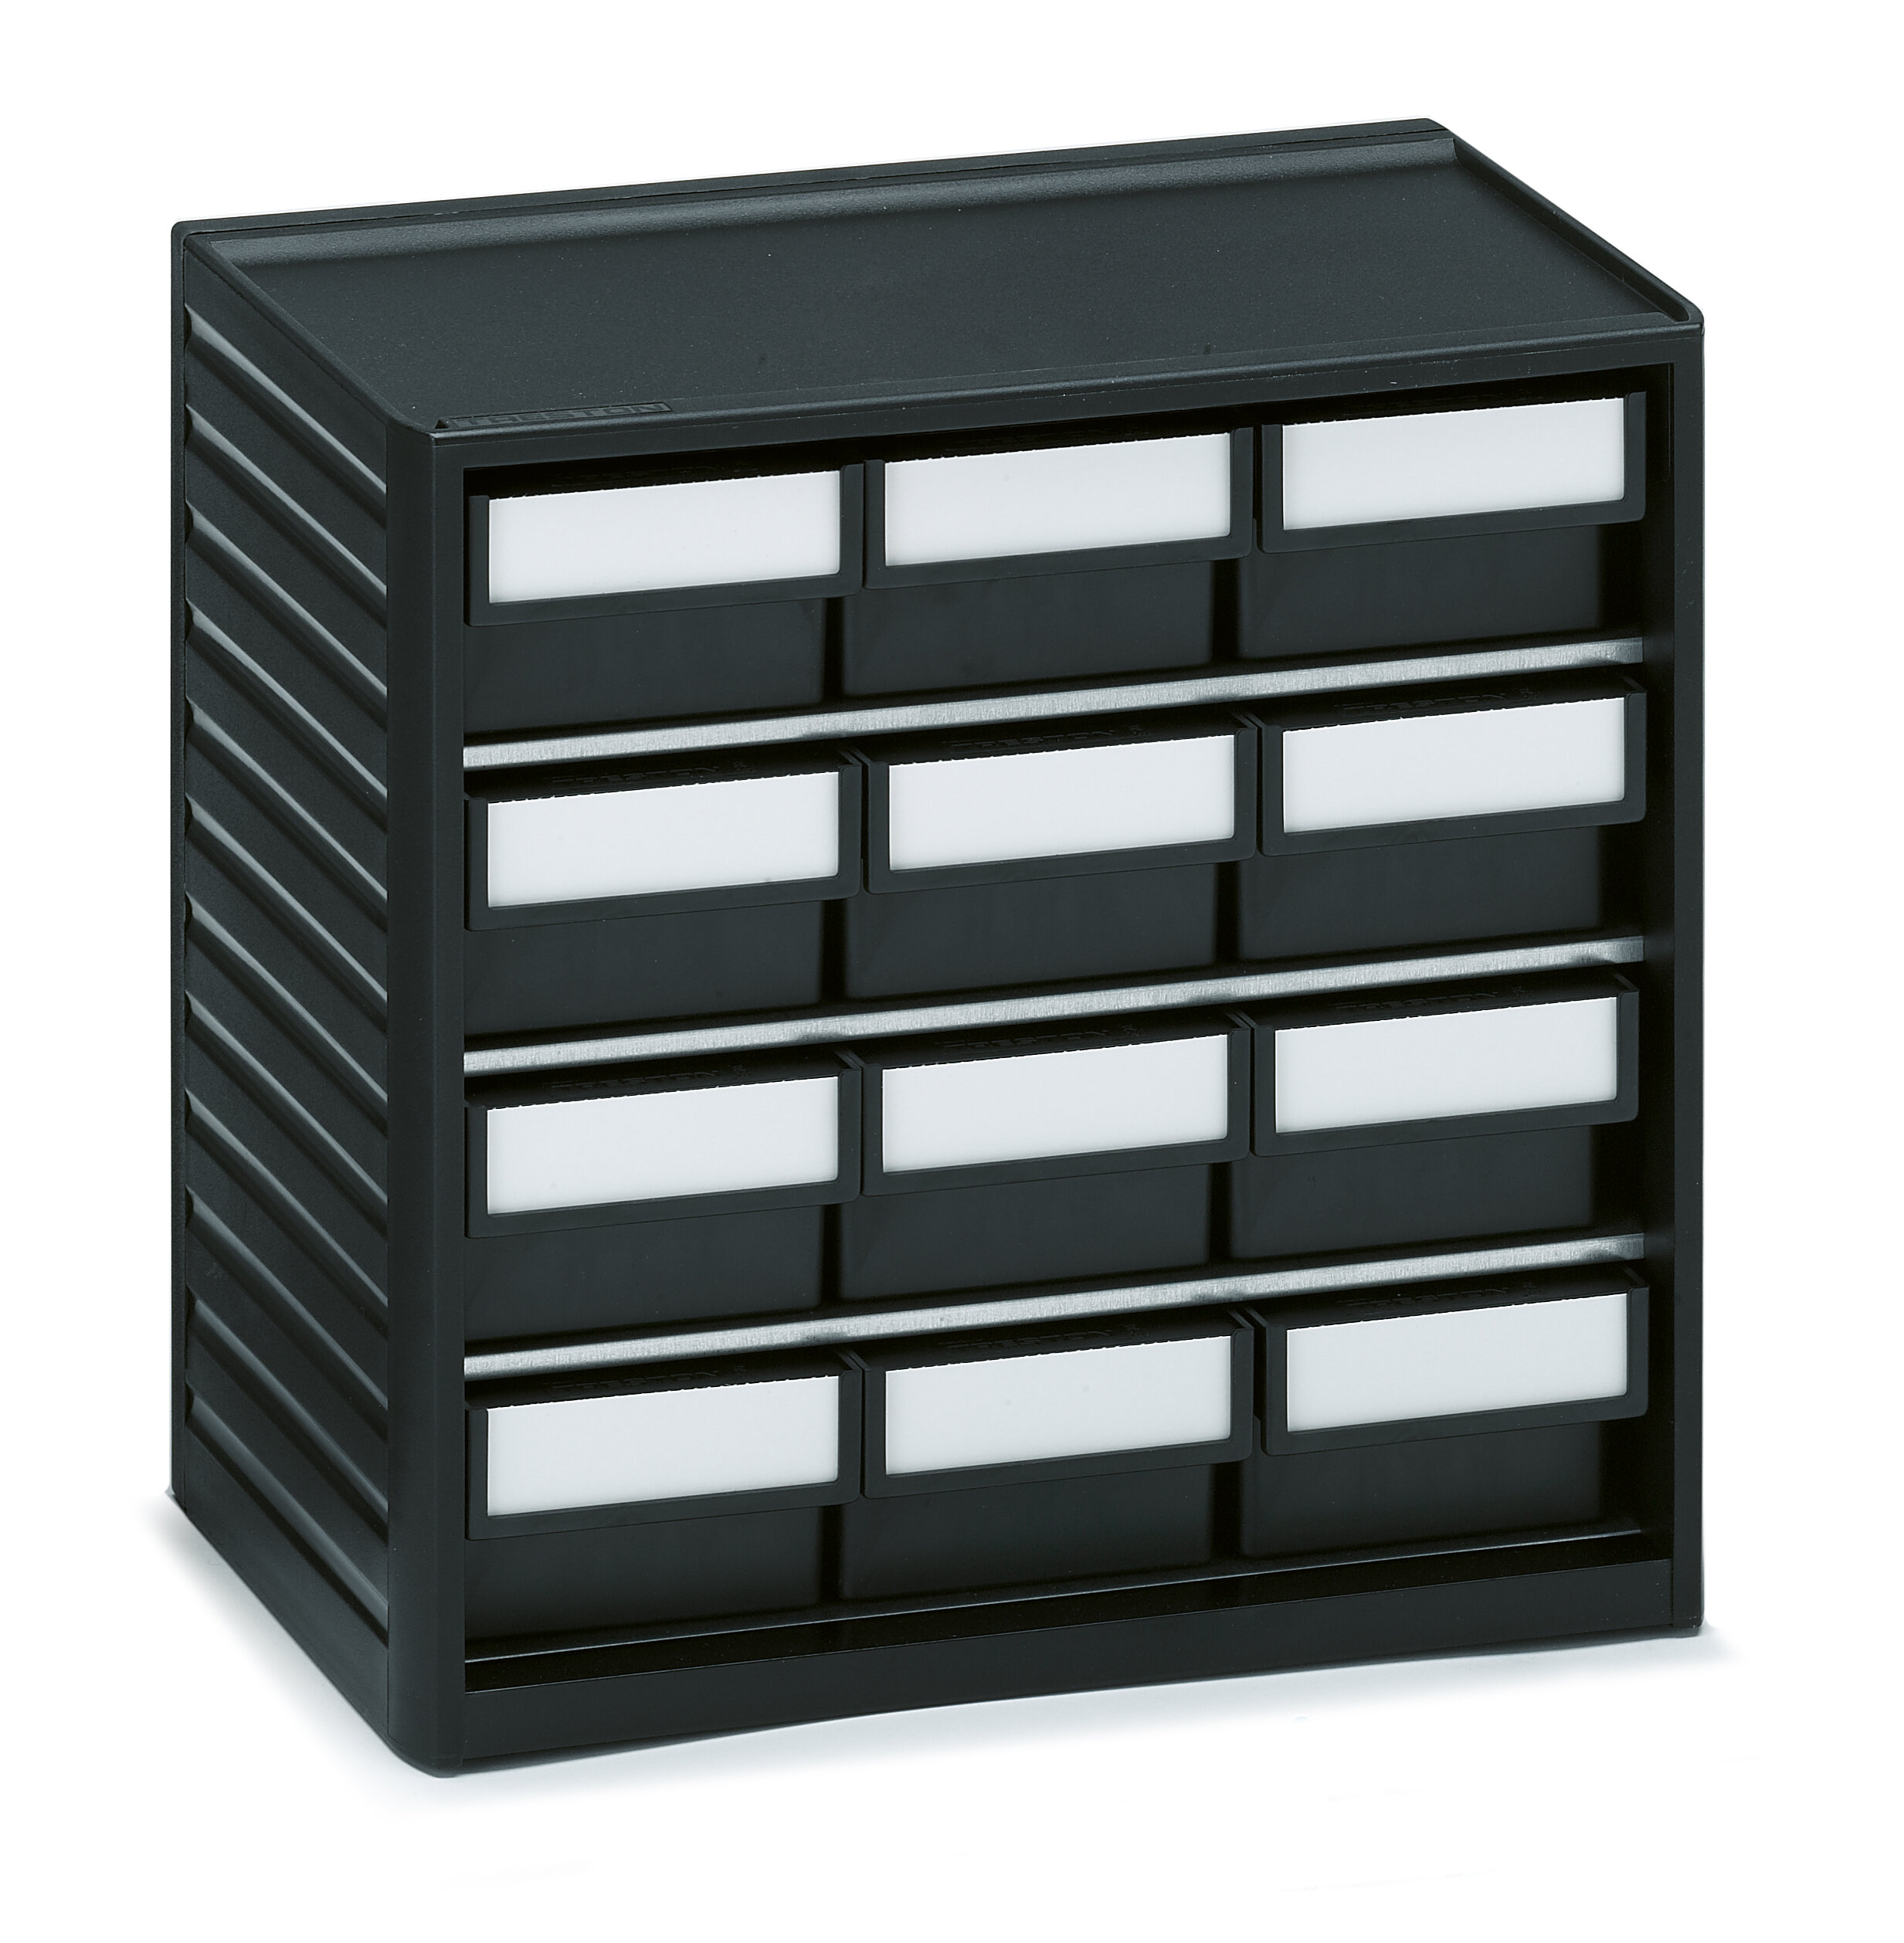 https://www.treston.us/sites/default/files/styles/full_size_product_image/public/images/product_images/esd-sm.-parts-cabinet-w-12-drawers-type-l-64-4esd.jpg.jpeg?itok=WhRHFUY-